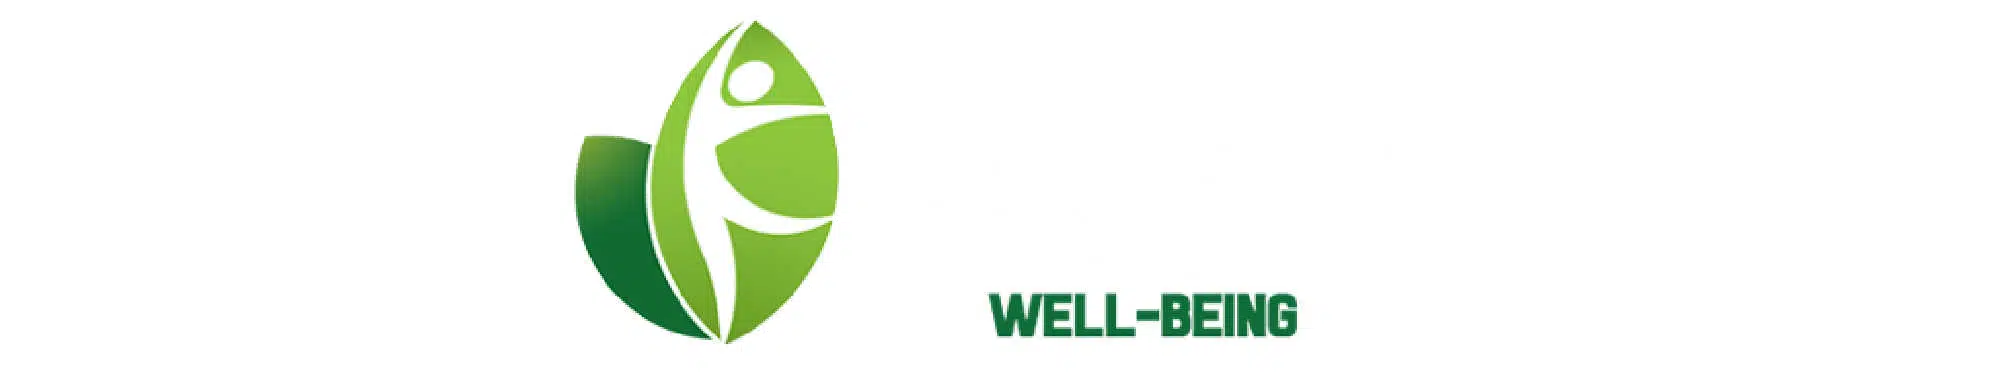 image of well being